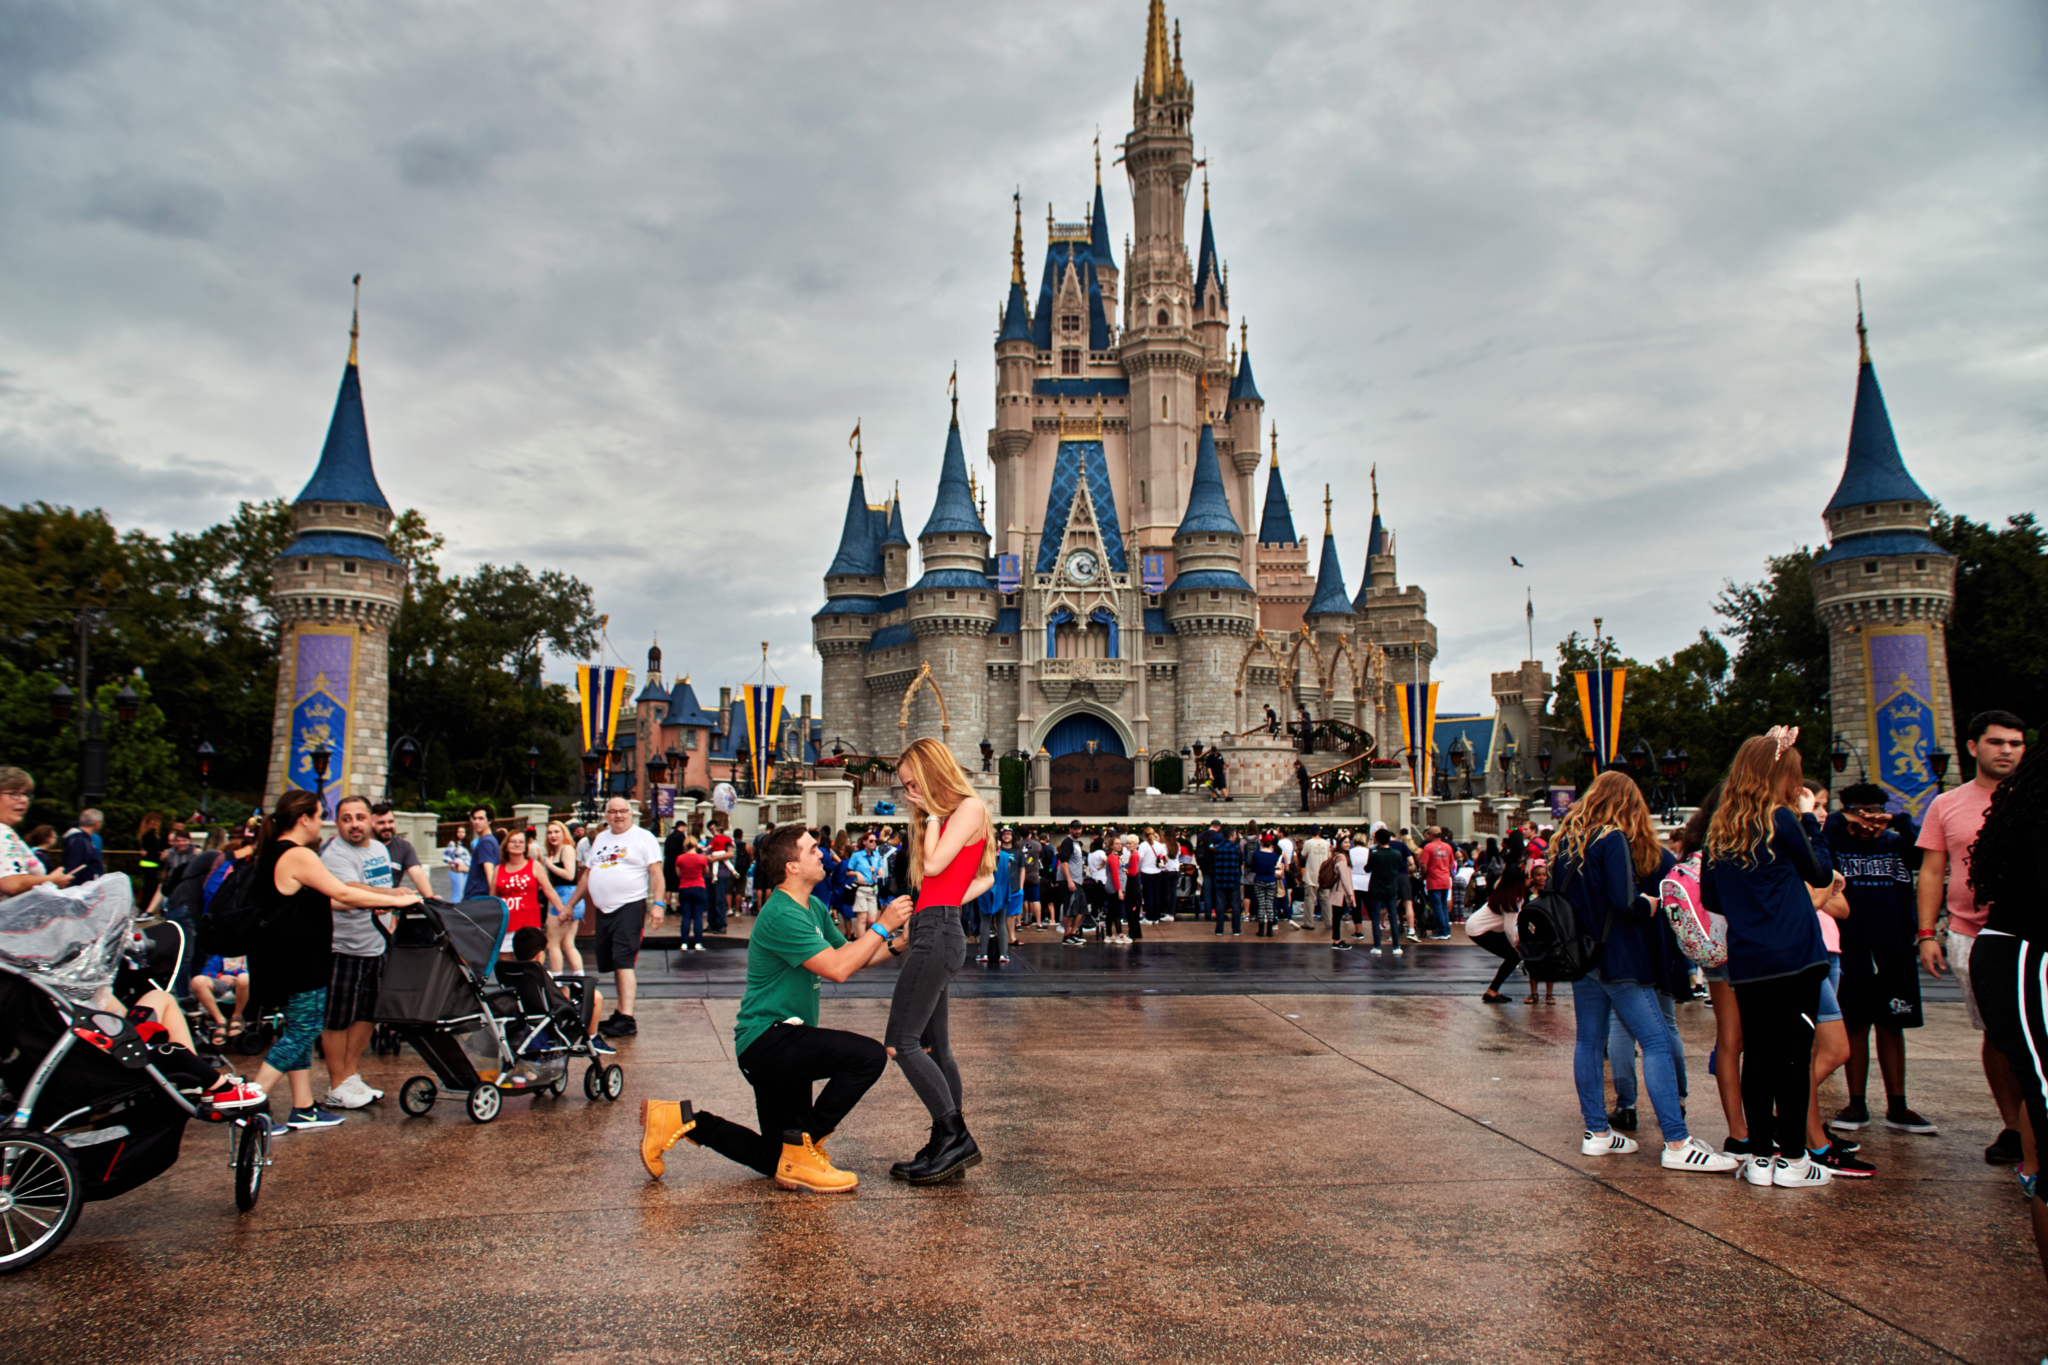 Young man proposes to a young woman in front of the castle at the magic kingdom